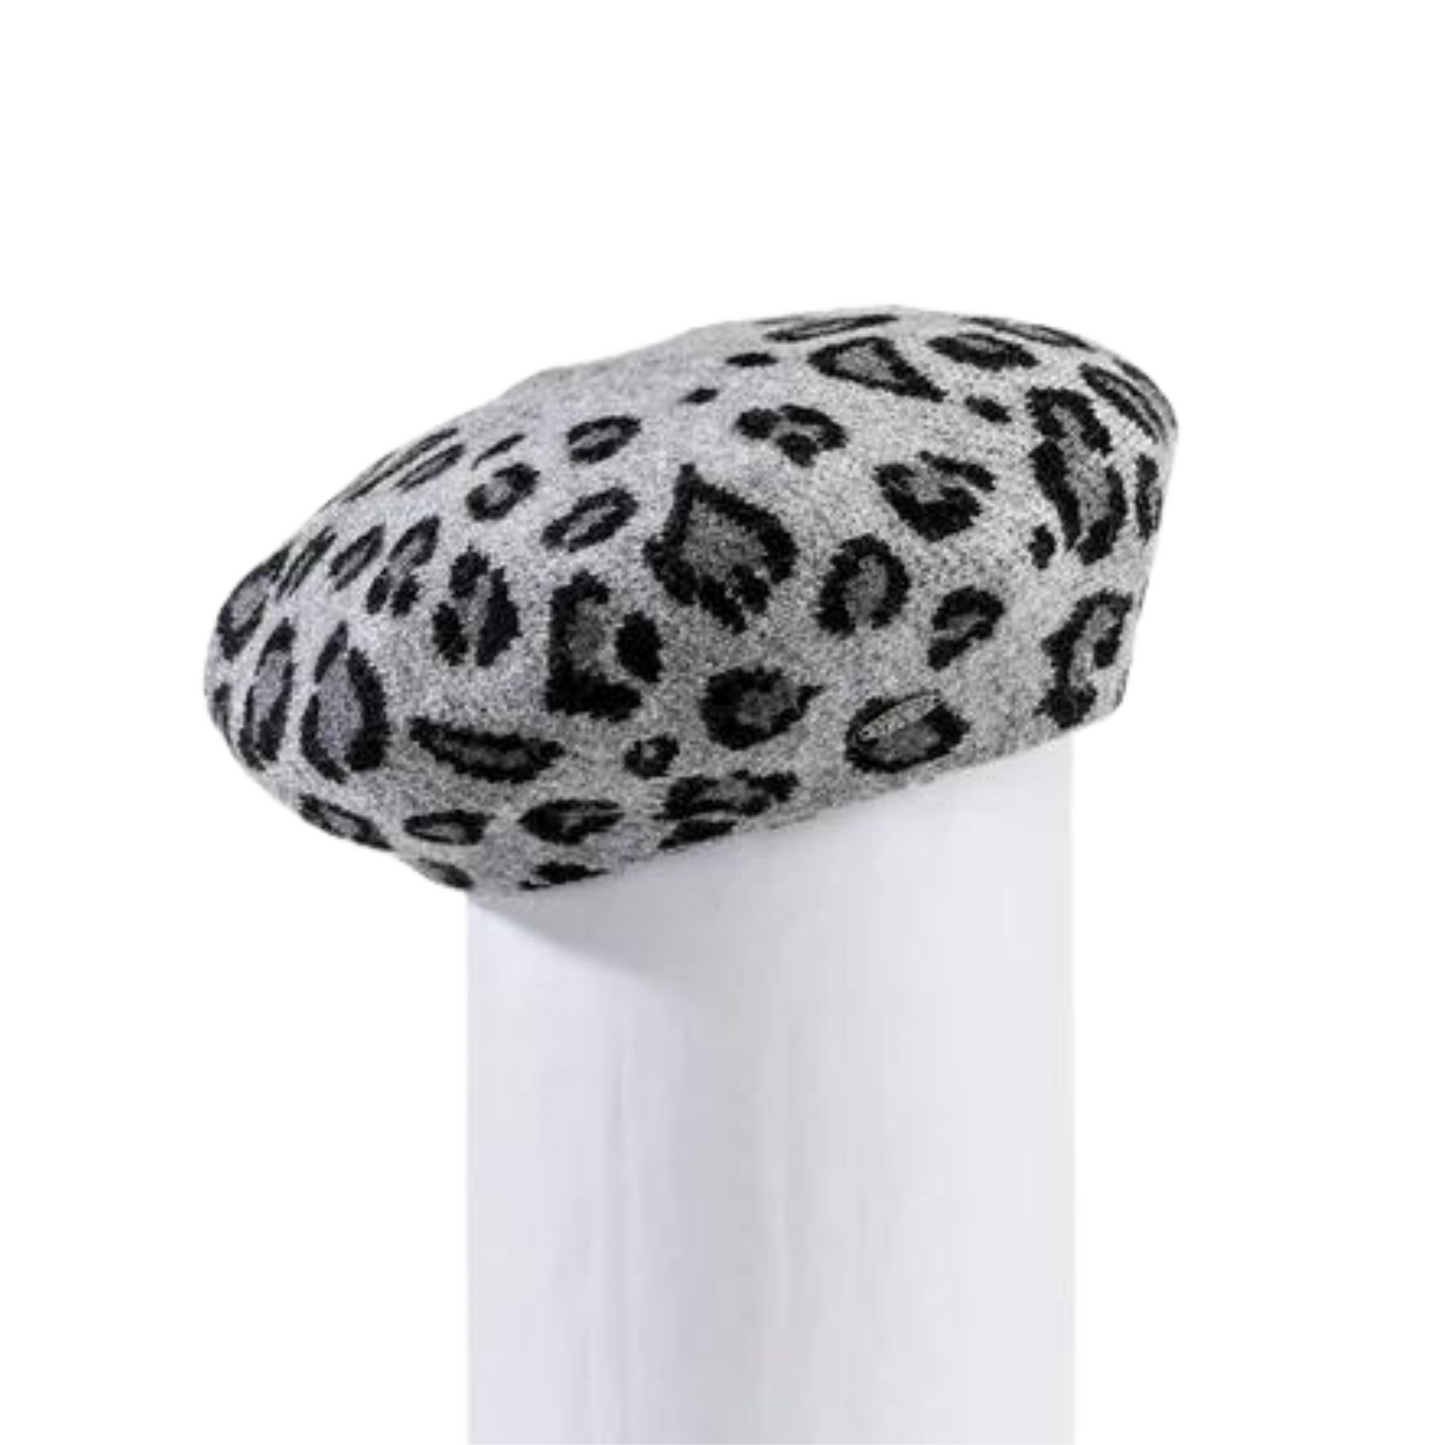 Photo of the hat displayed, showing the fit and the leopard print.